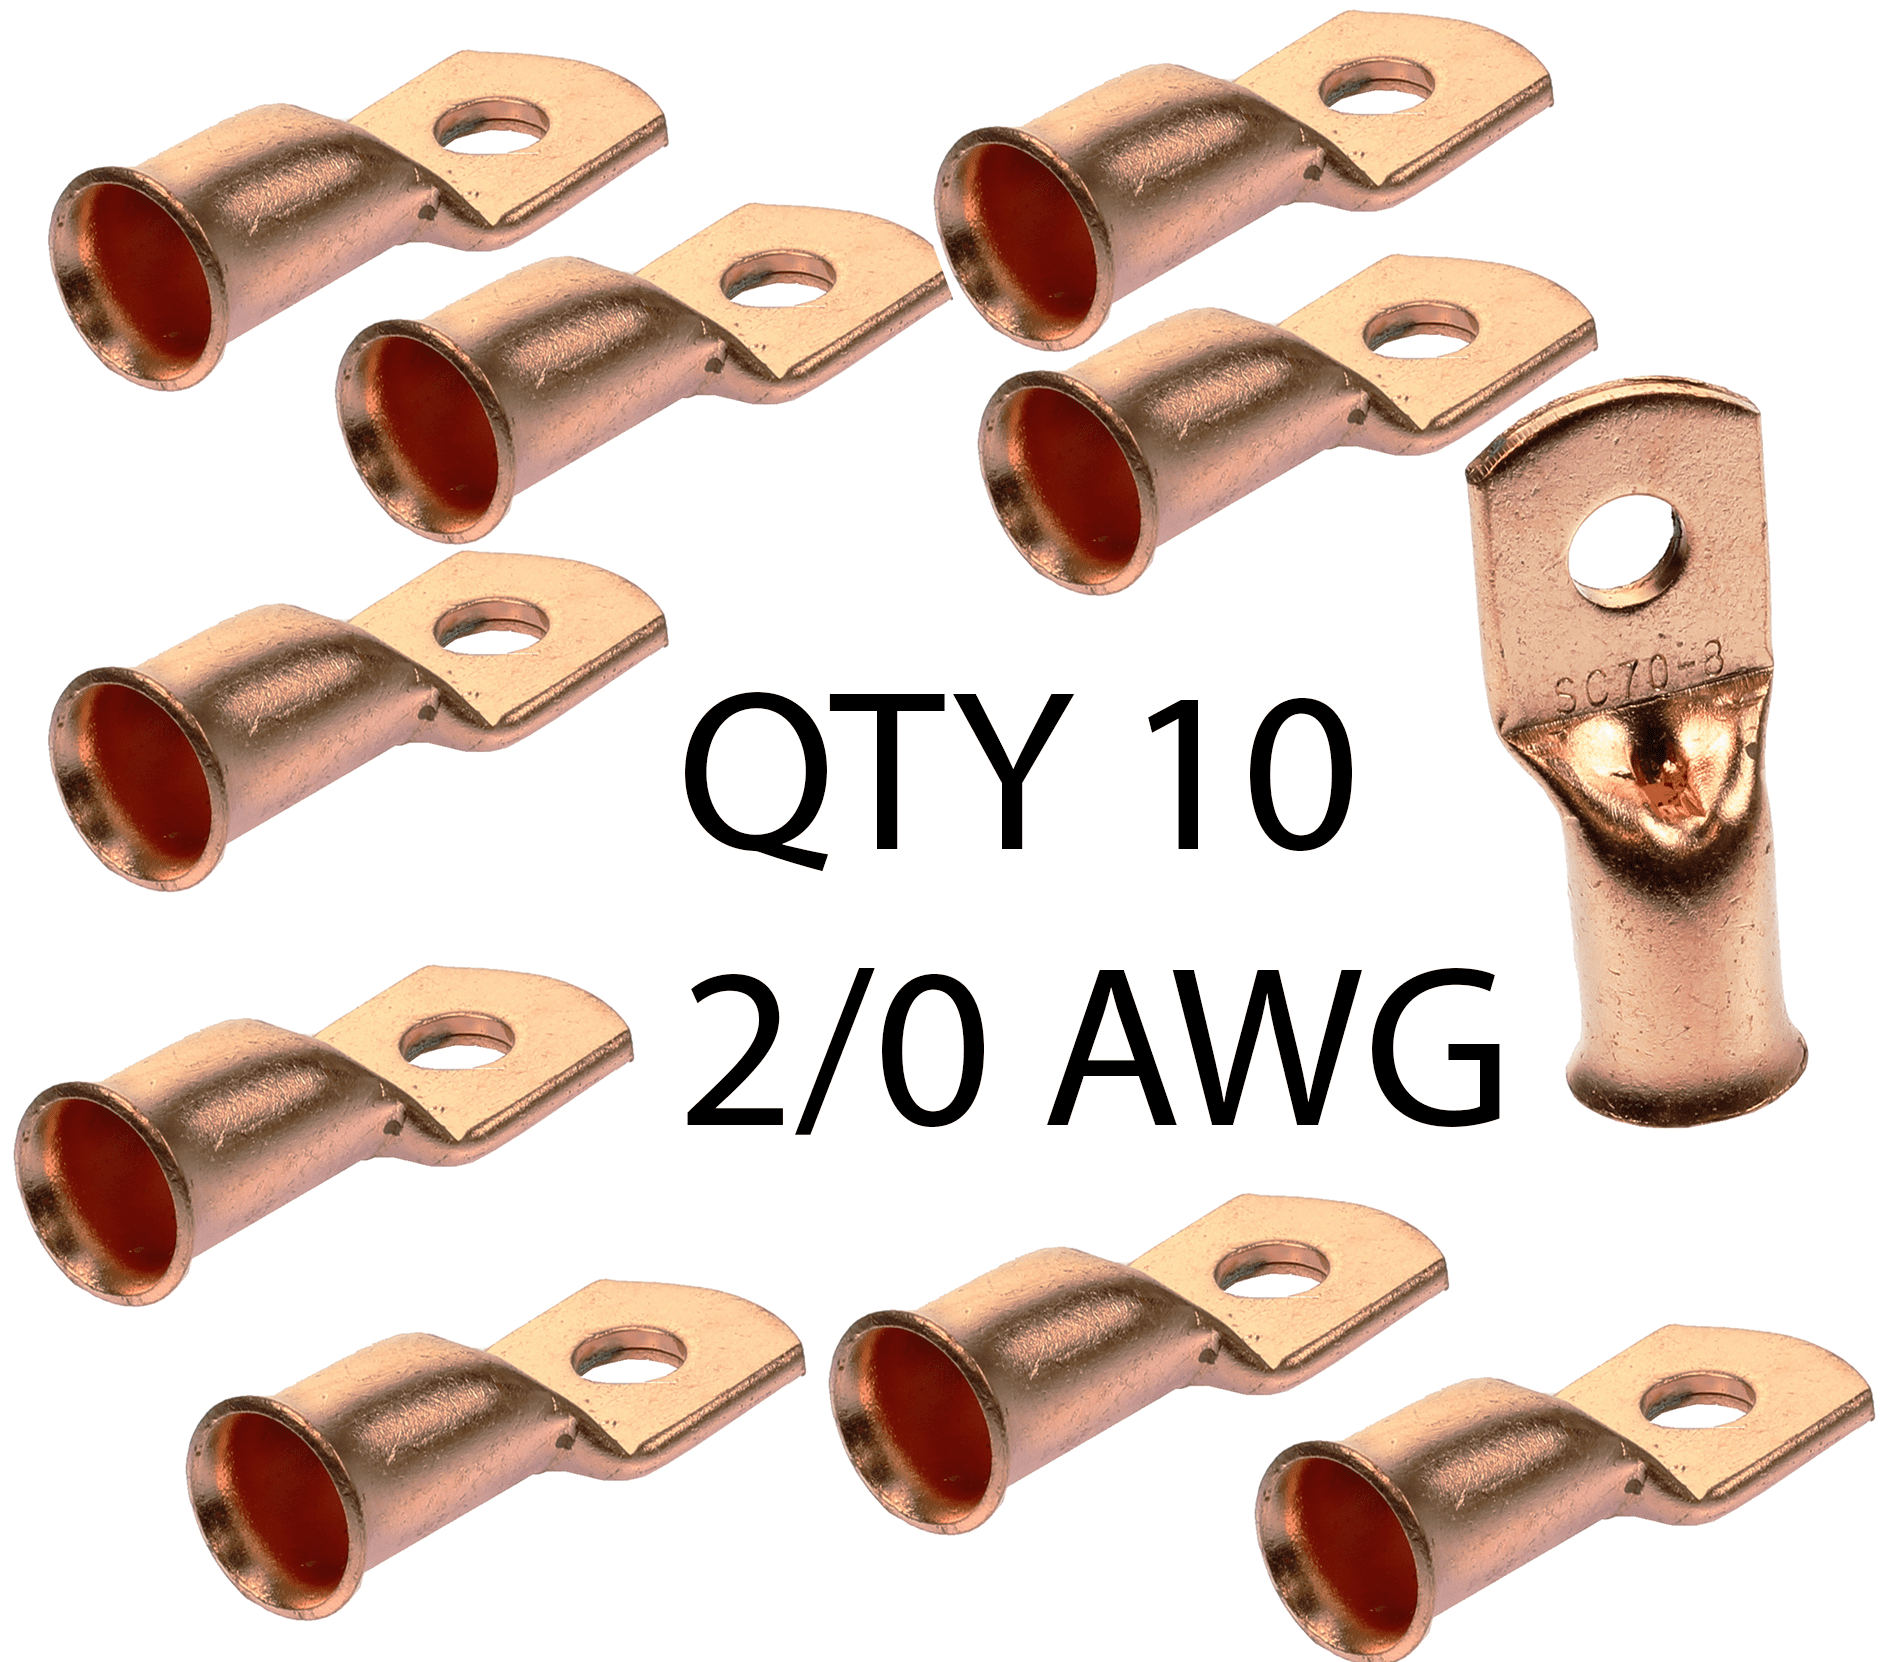 10Pcs Purple Copper Ring Terminals Lug Bare Uninsulated Connectors #10-3/8" Hole